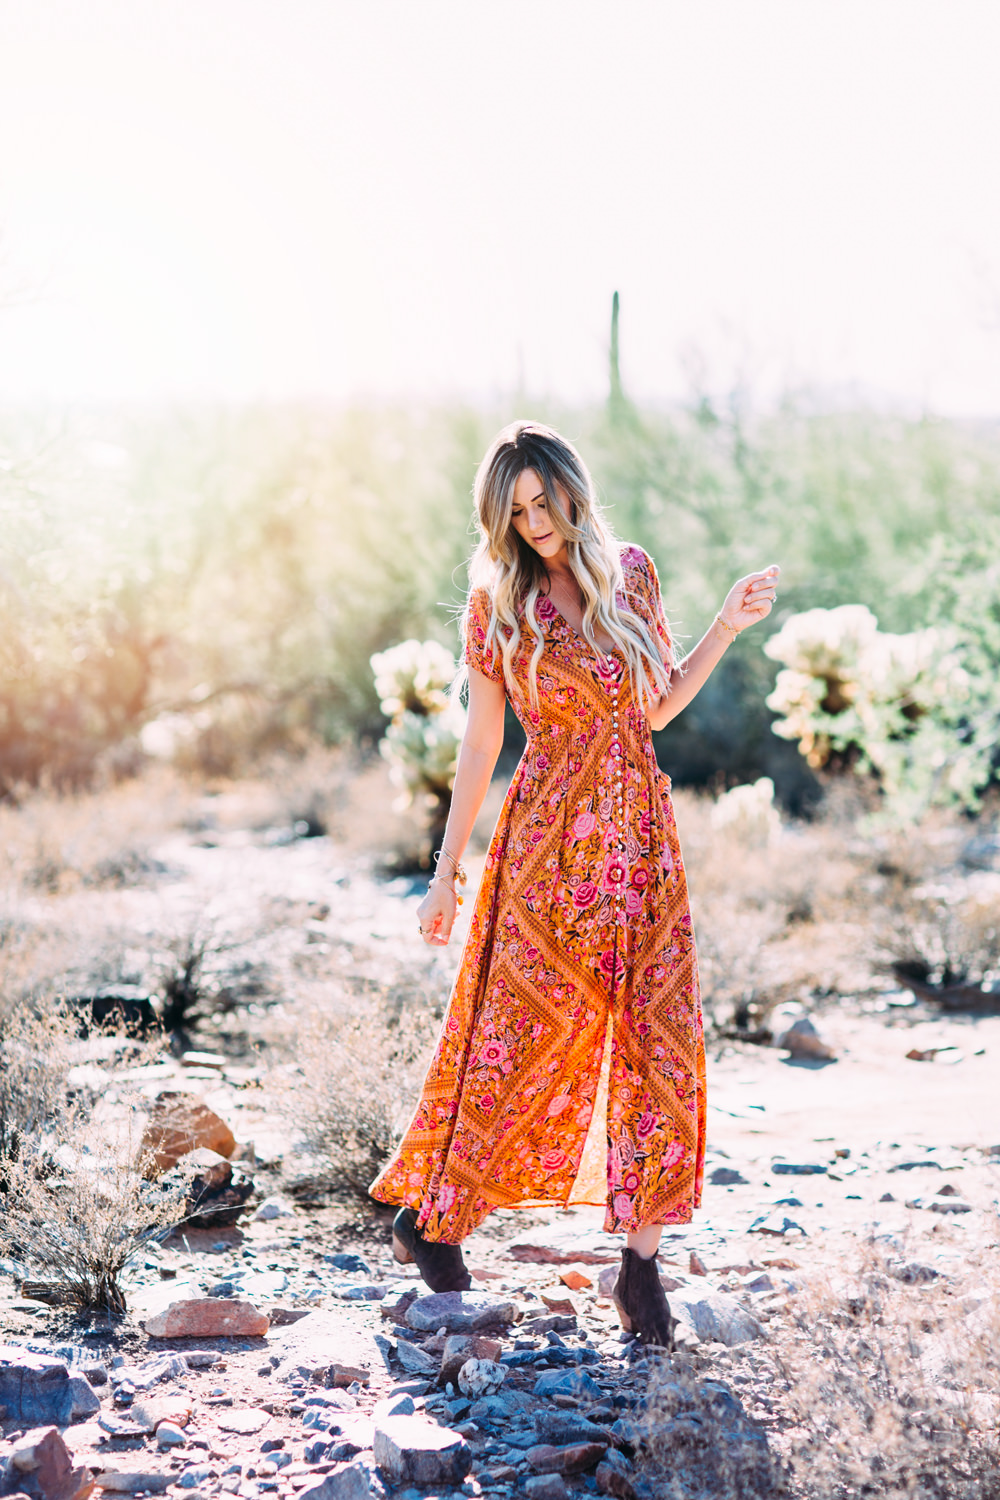 Dash of Darling styles a bohemian vintage floral print button-front maxi dress in the Arizona desert for a simple summer look.